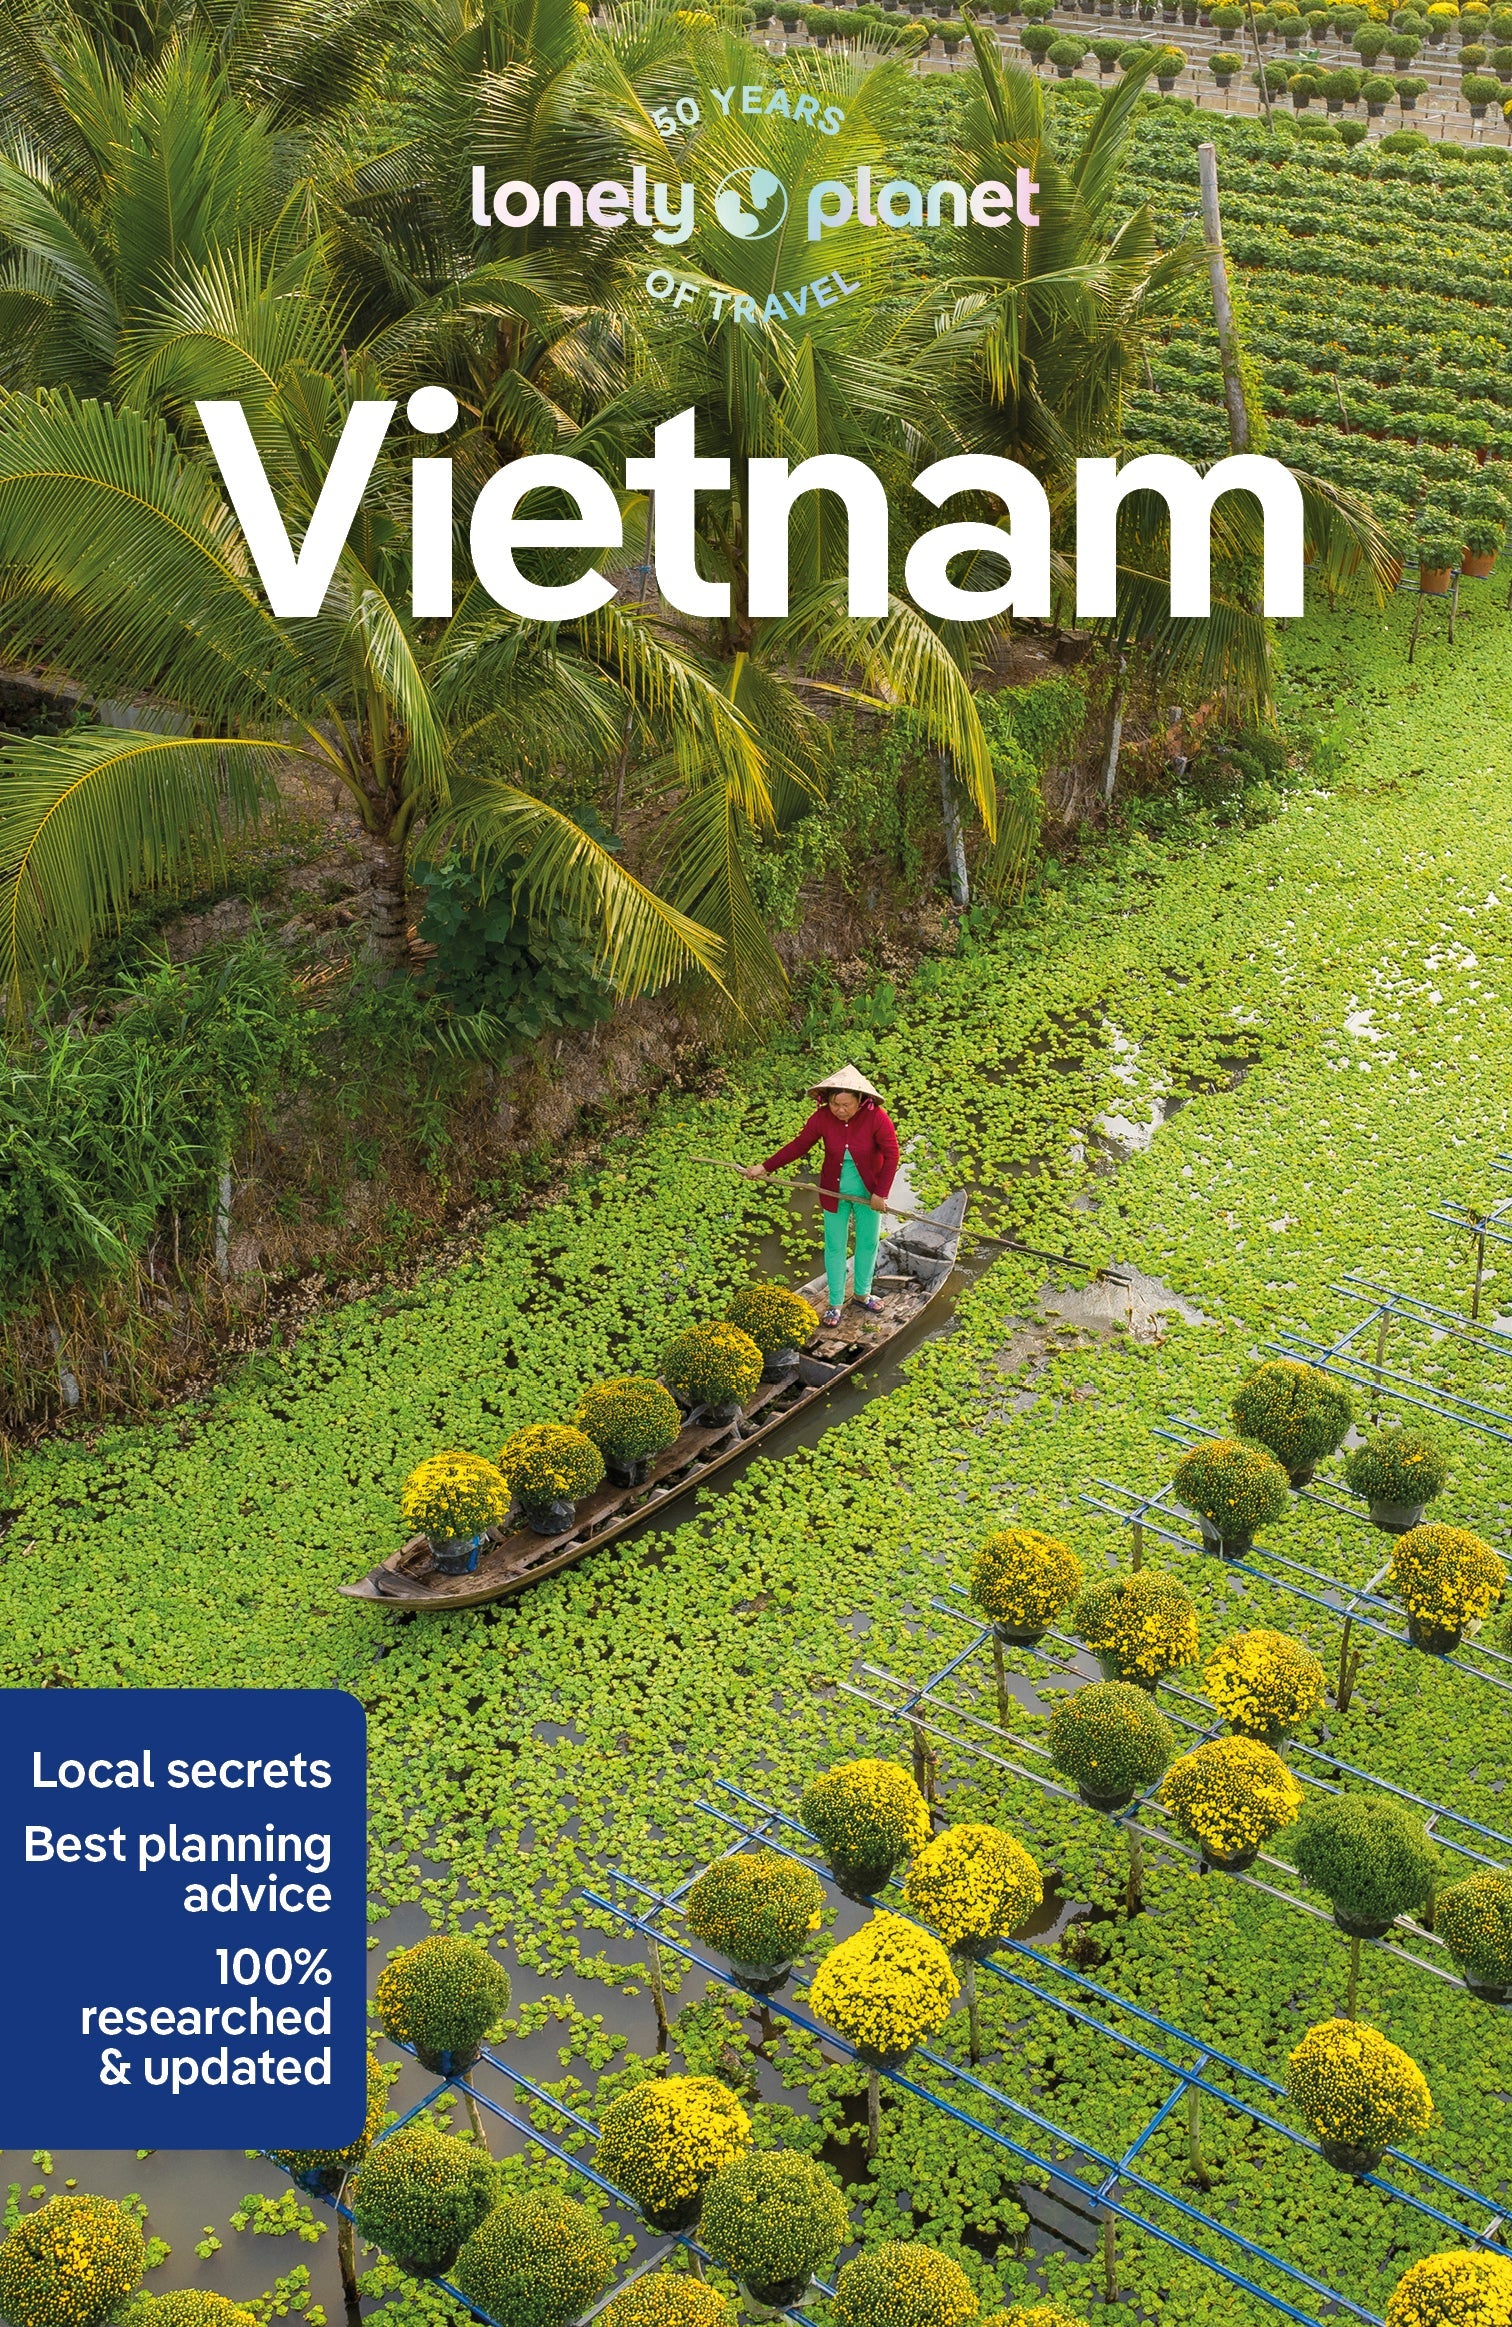 Travel guide: lonely planet vietnam planning map - folded map:  9781787014565 